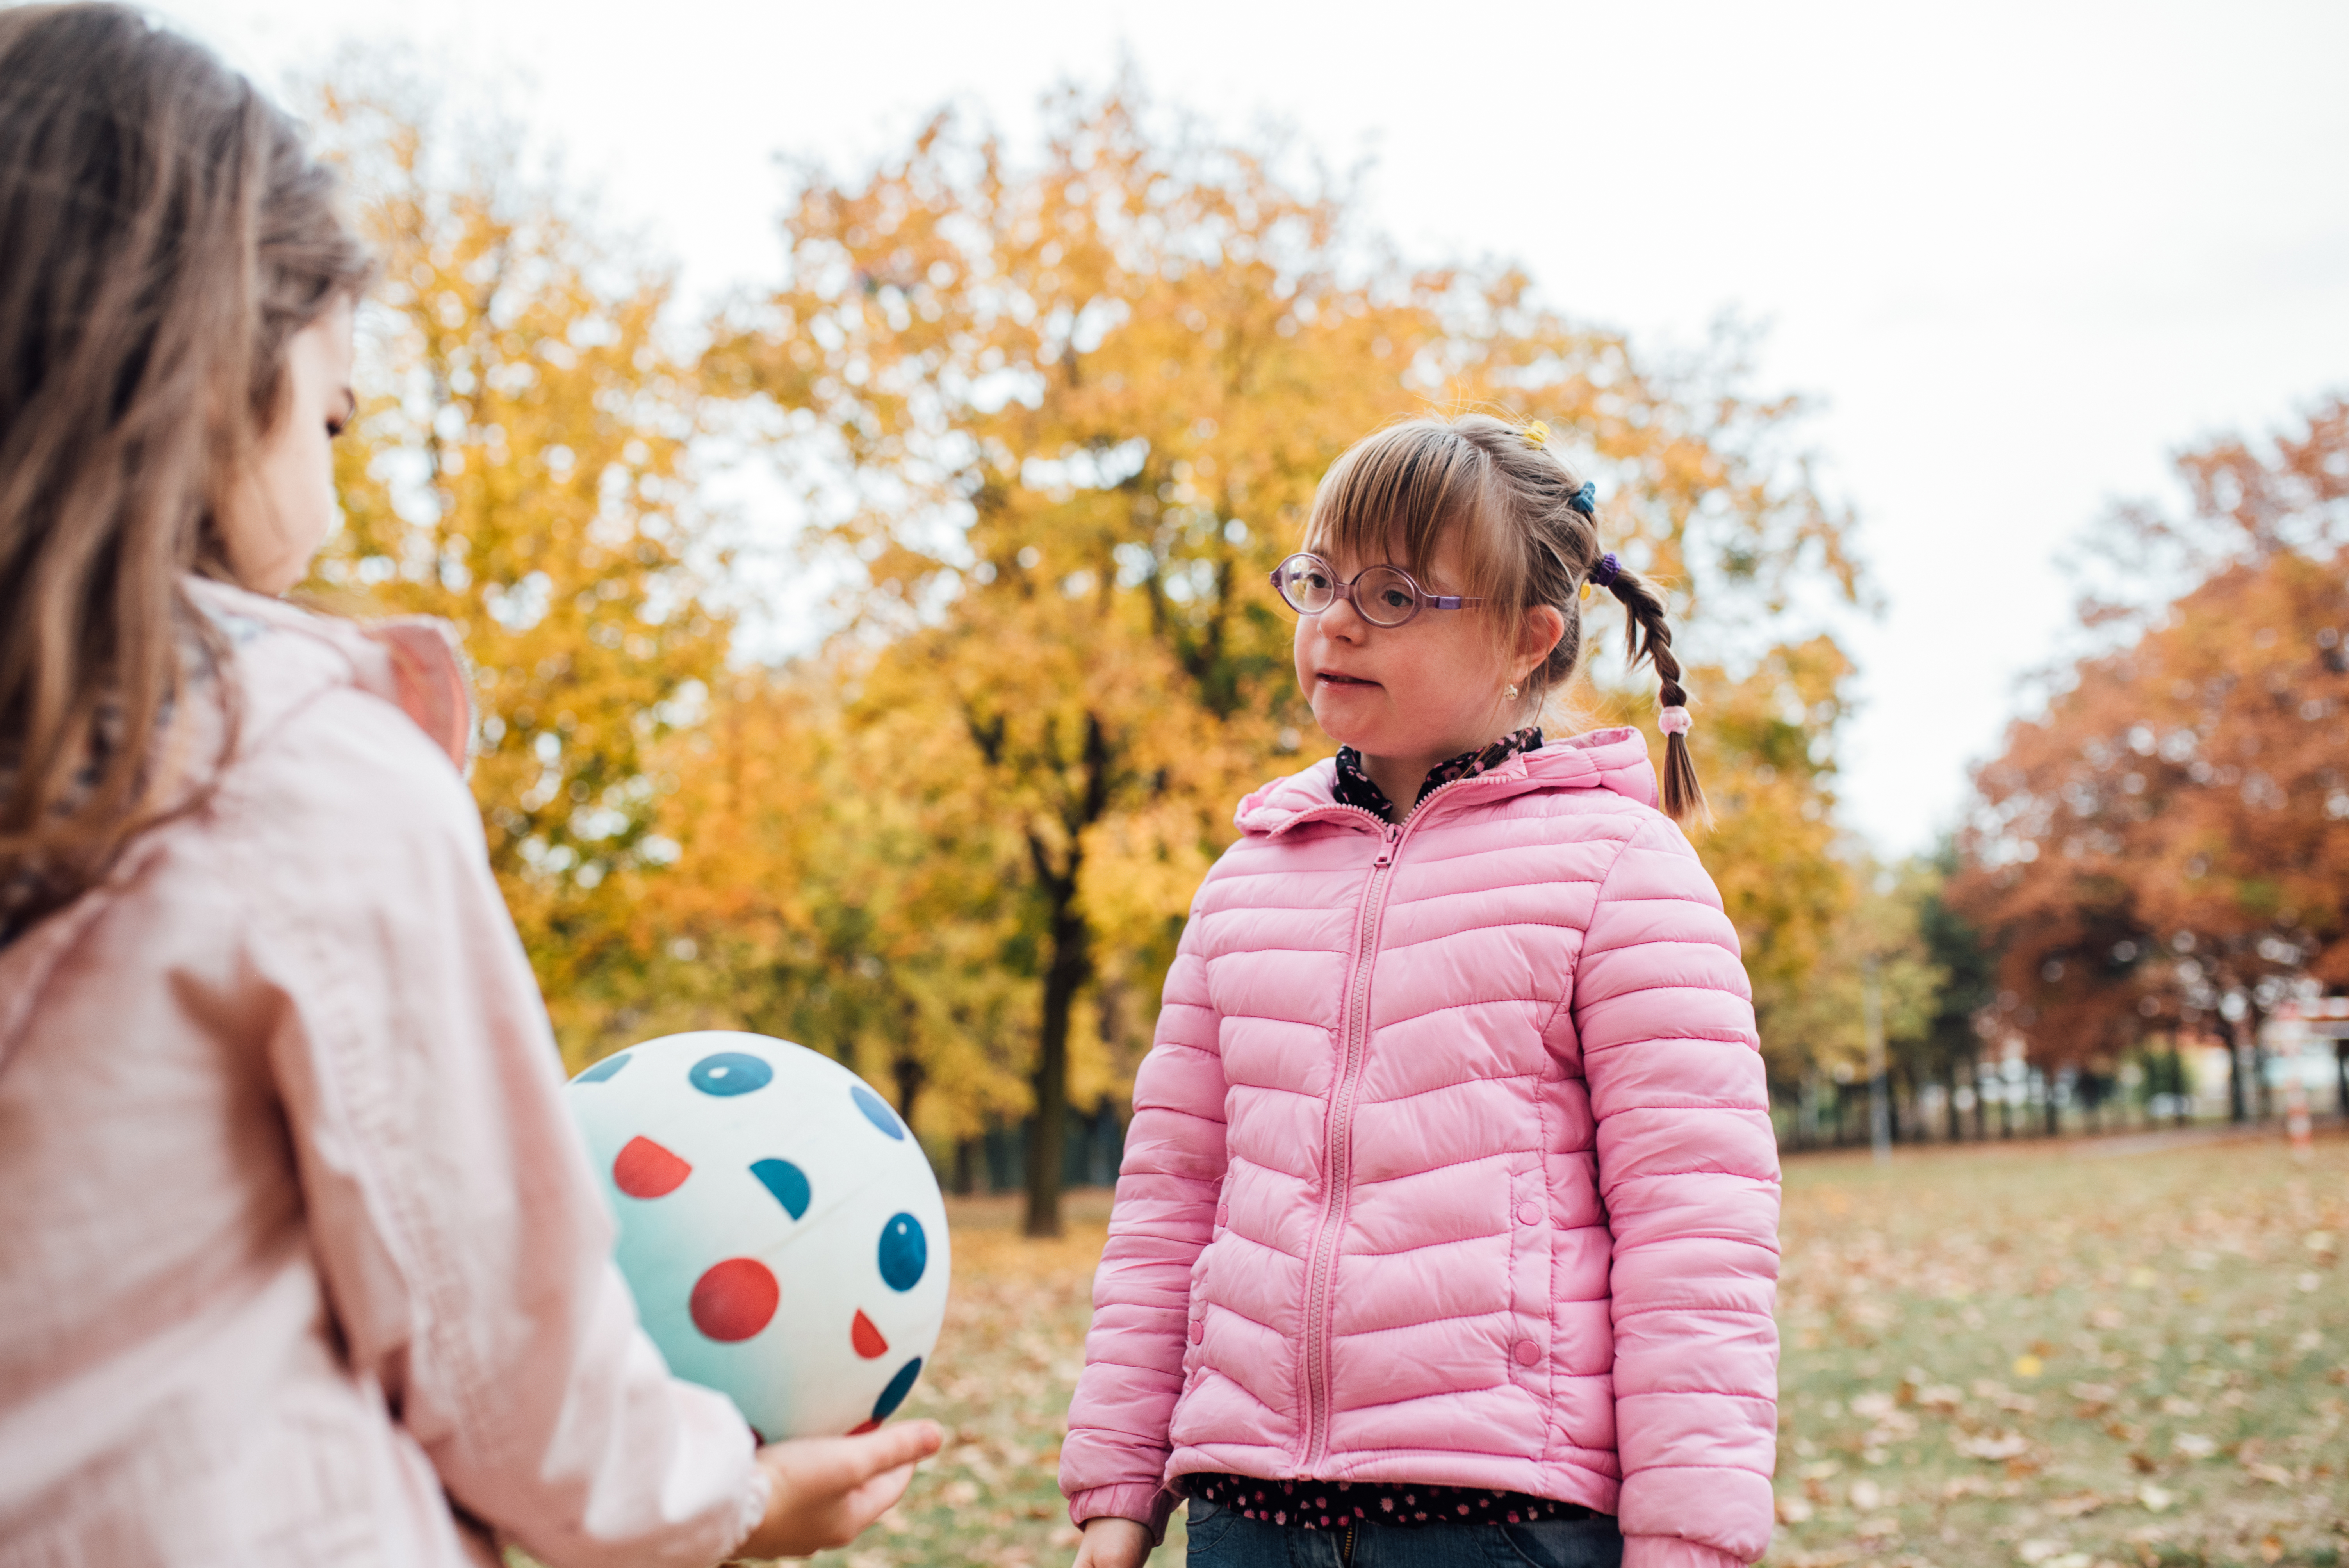 a child with down syndrome wearing a pink puff jacket smiling at an adult with blonde hair wearing a off white jacket holding a soccer ball